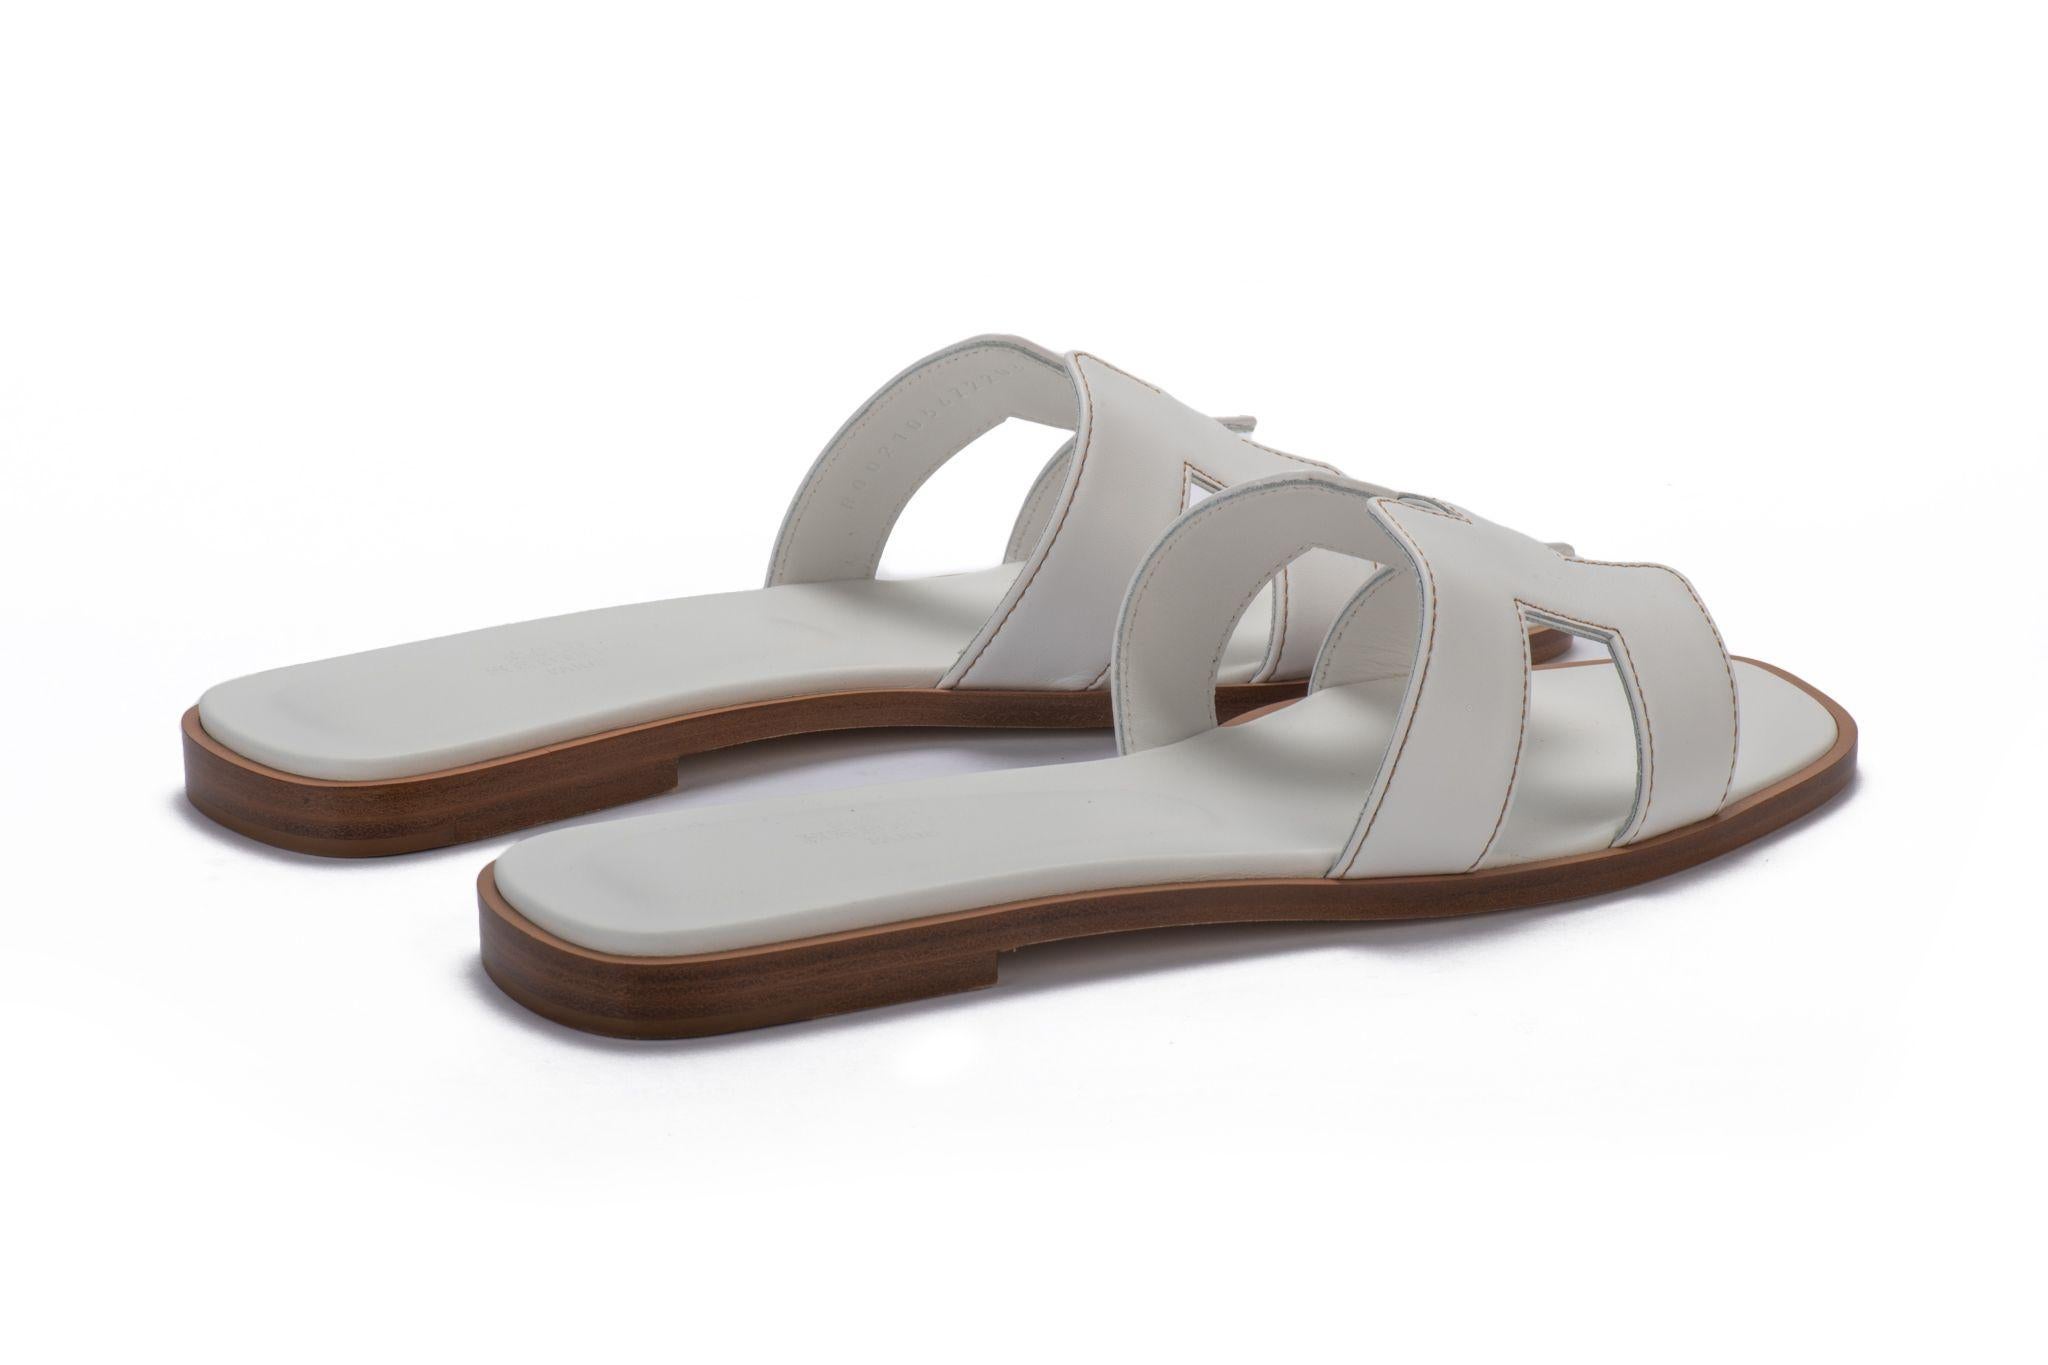 Hermes brand new white calfskin oran sandals. Size European N. 38 1/2, come with dust cover and original box.